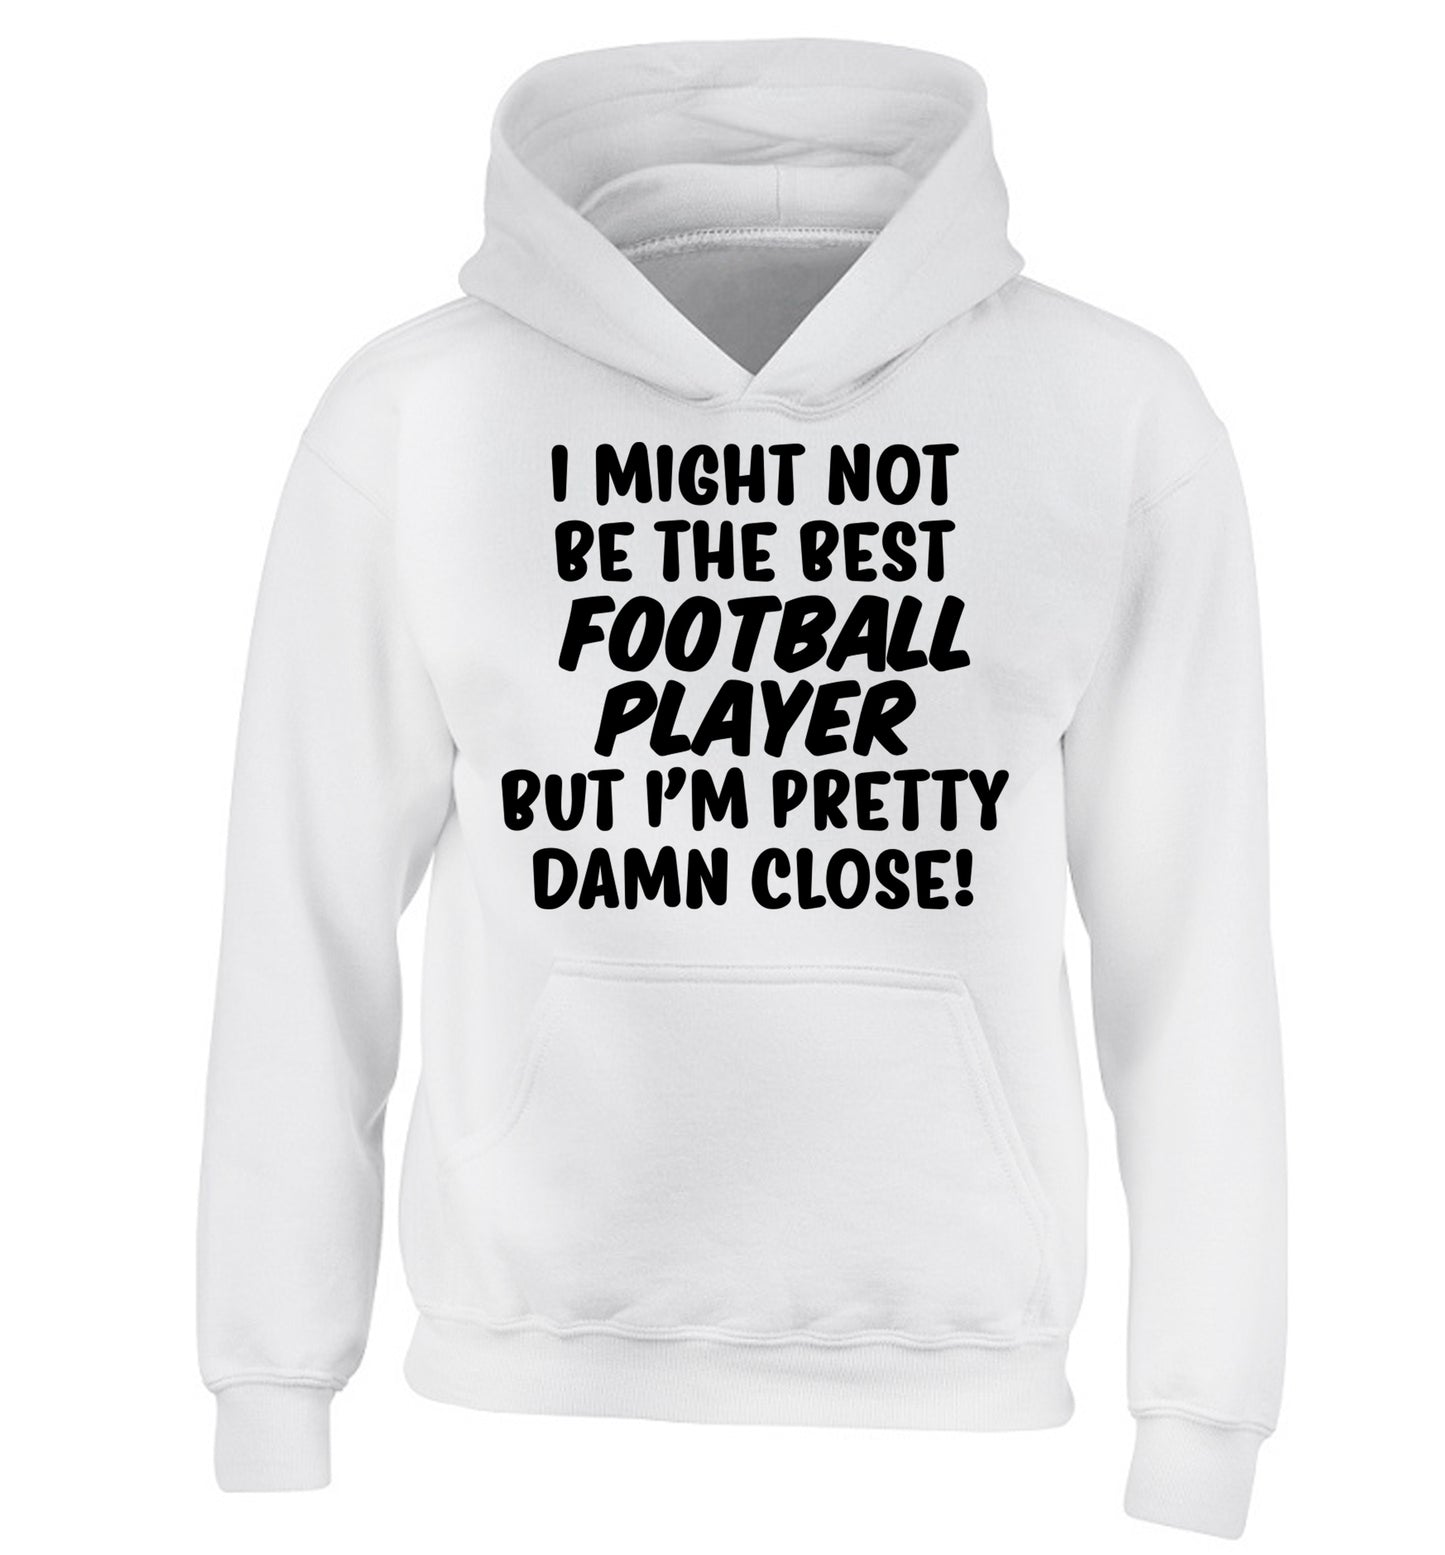 I might not be the best football player but I'm pretty close! children's white hoodie 12-14 Years